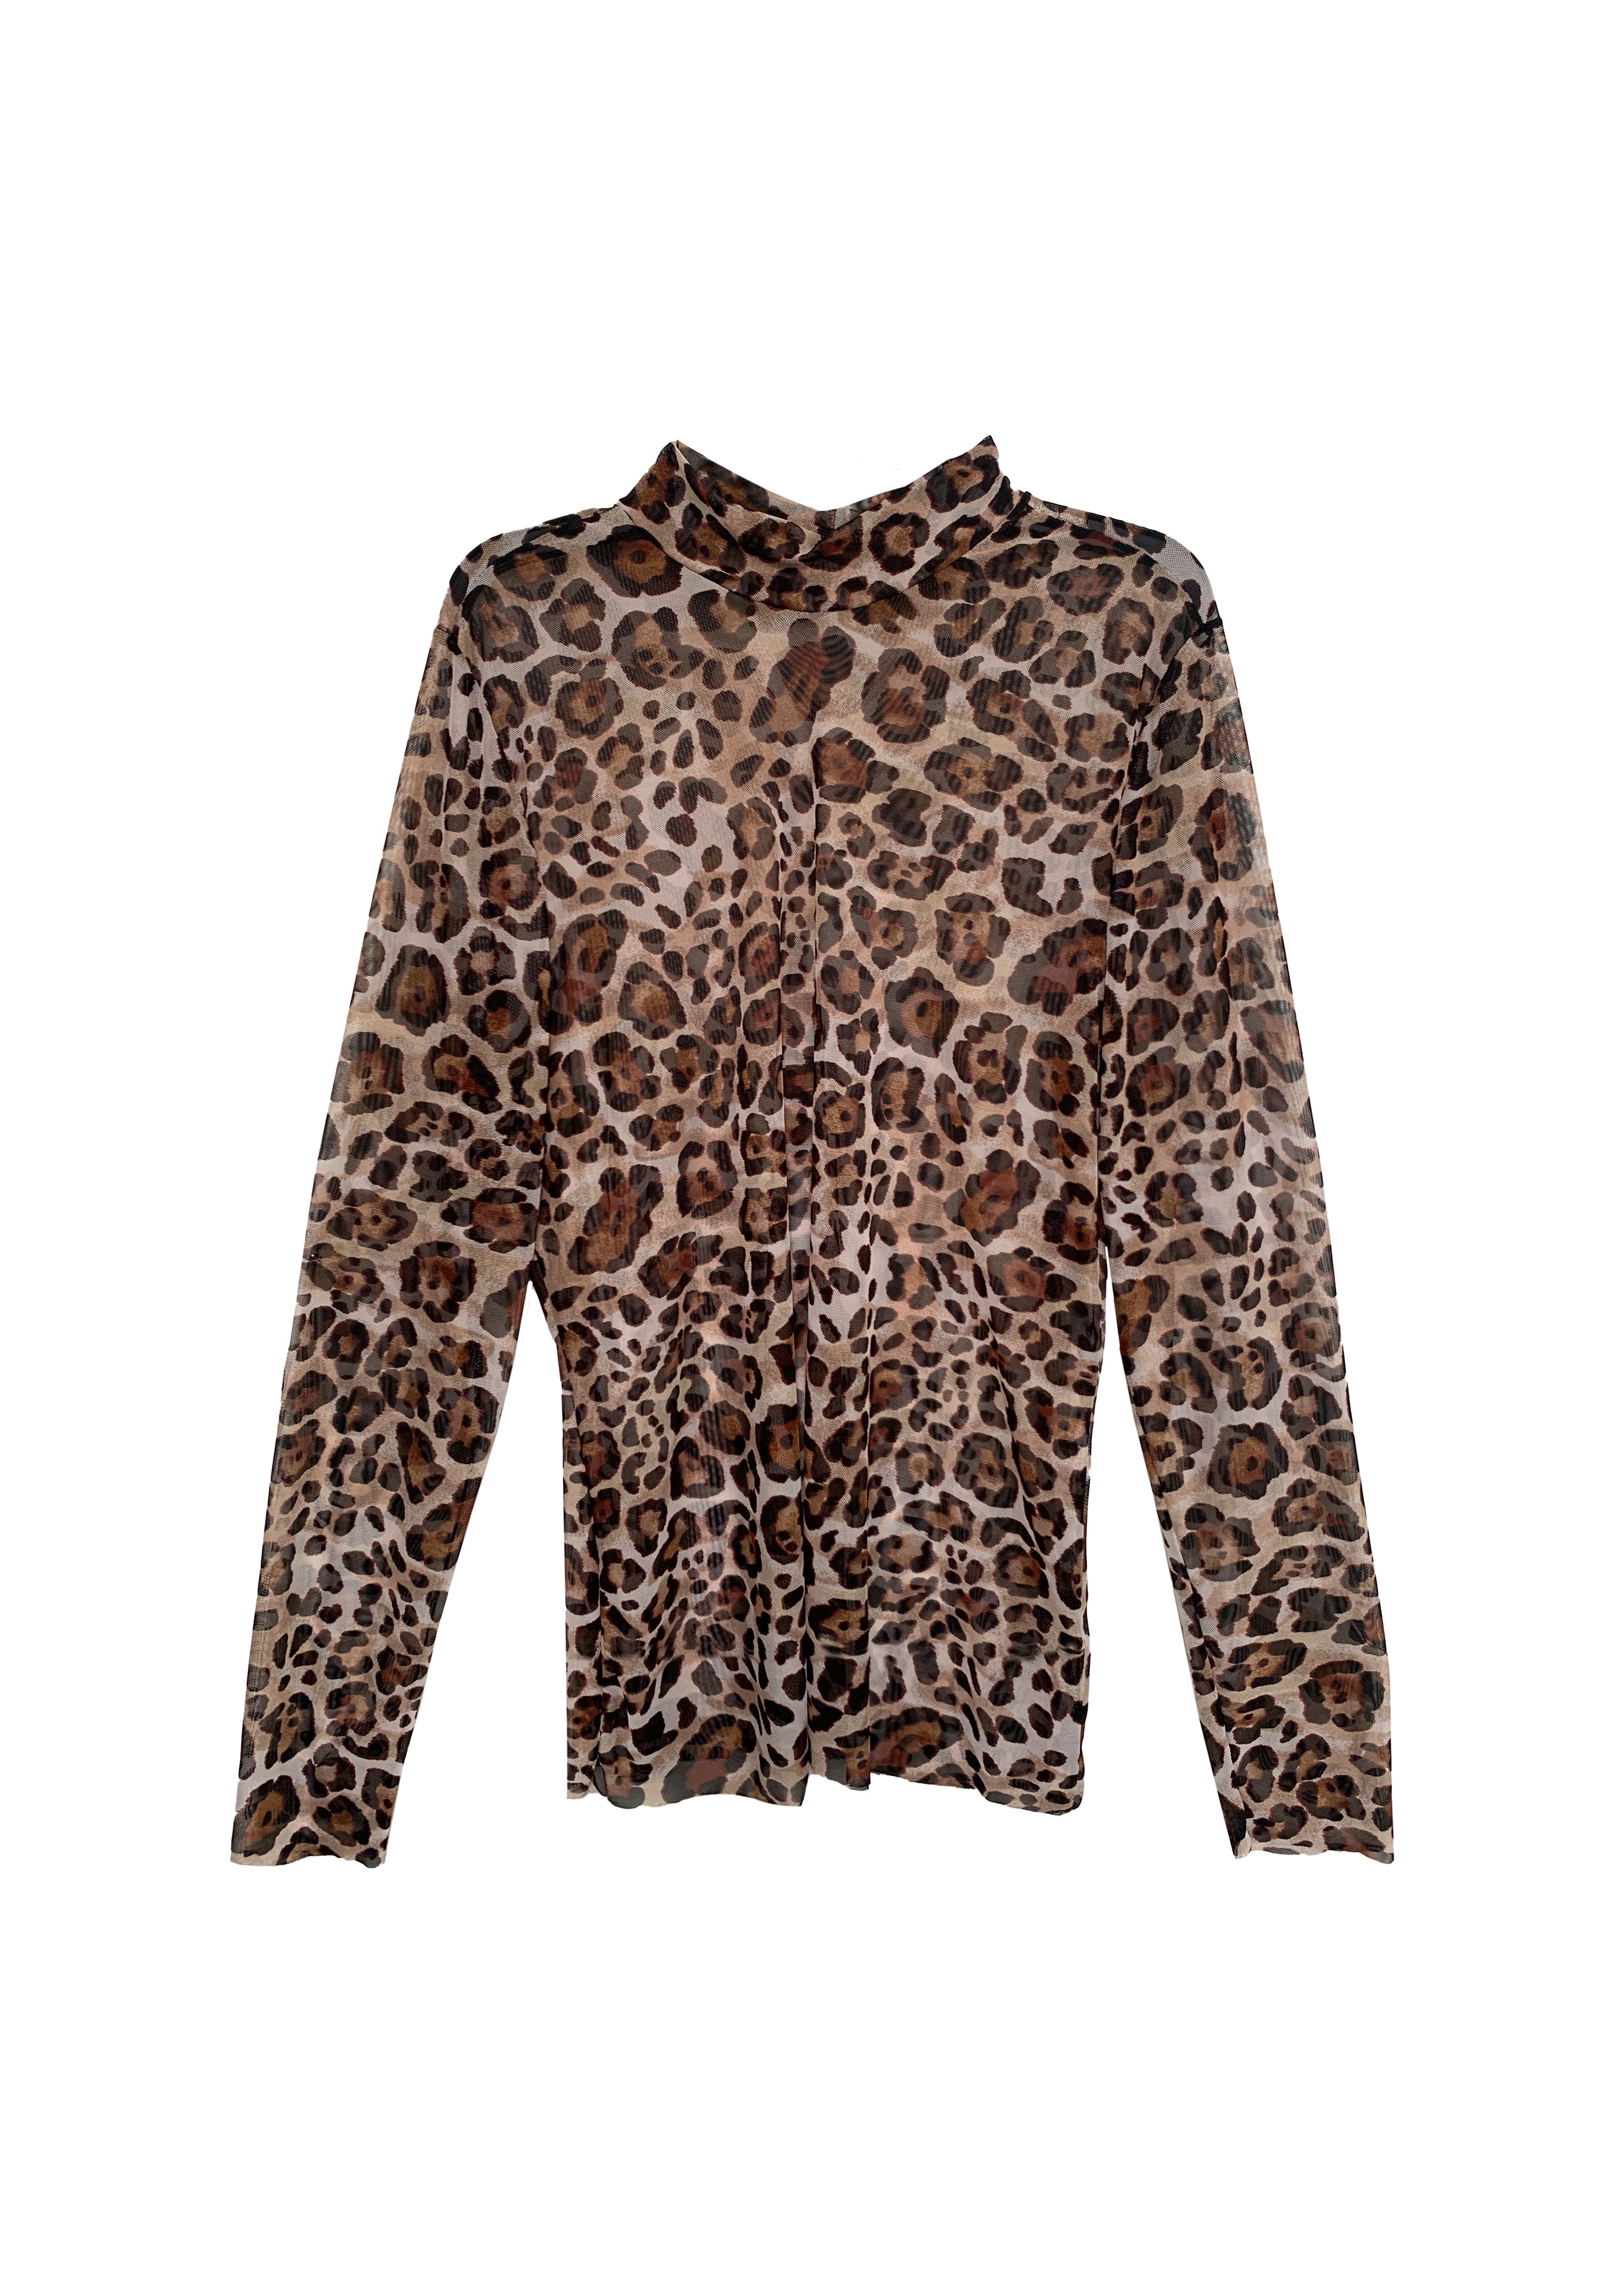 Leopard Mesh Top - Designed to fit the "True Size Majority" 10+